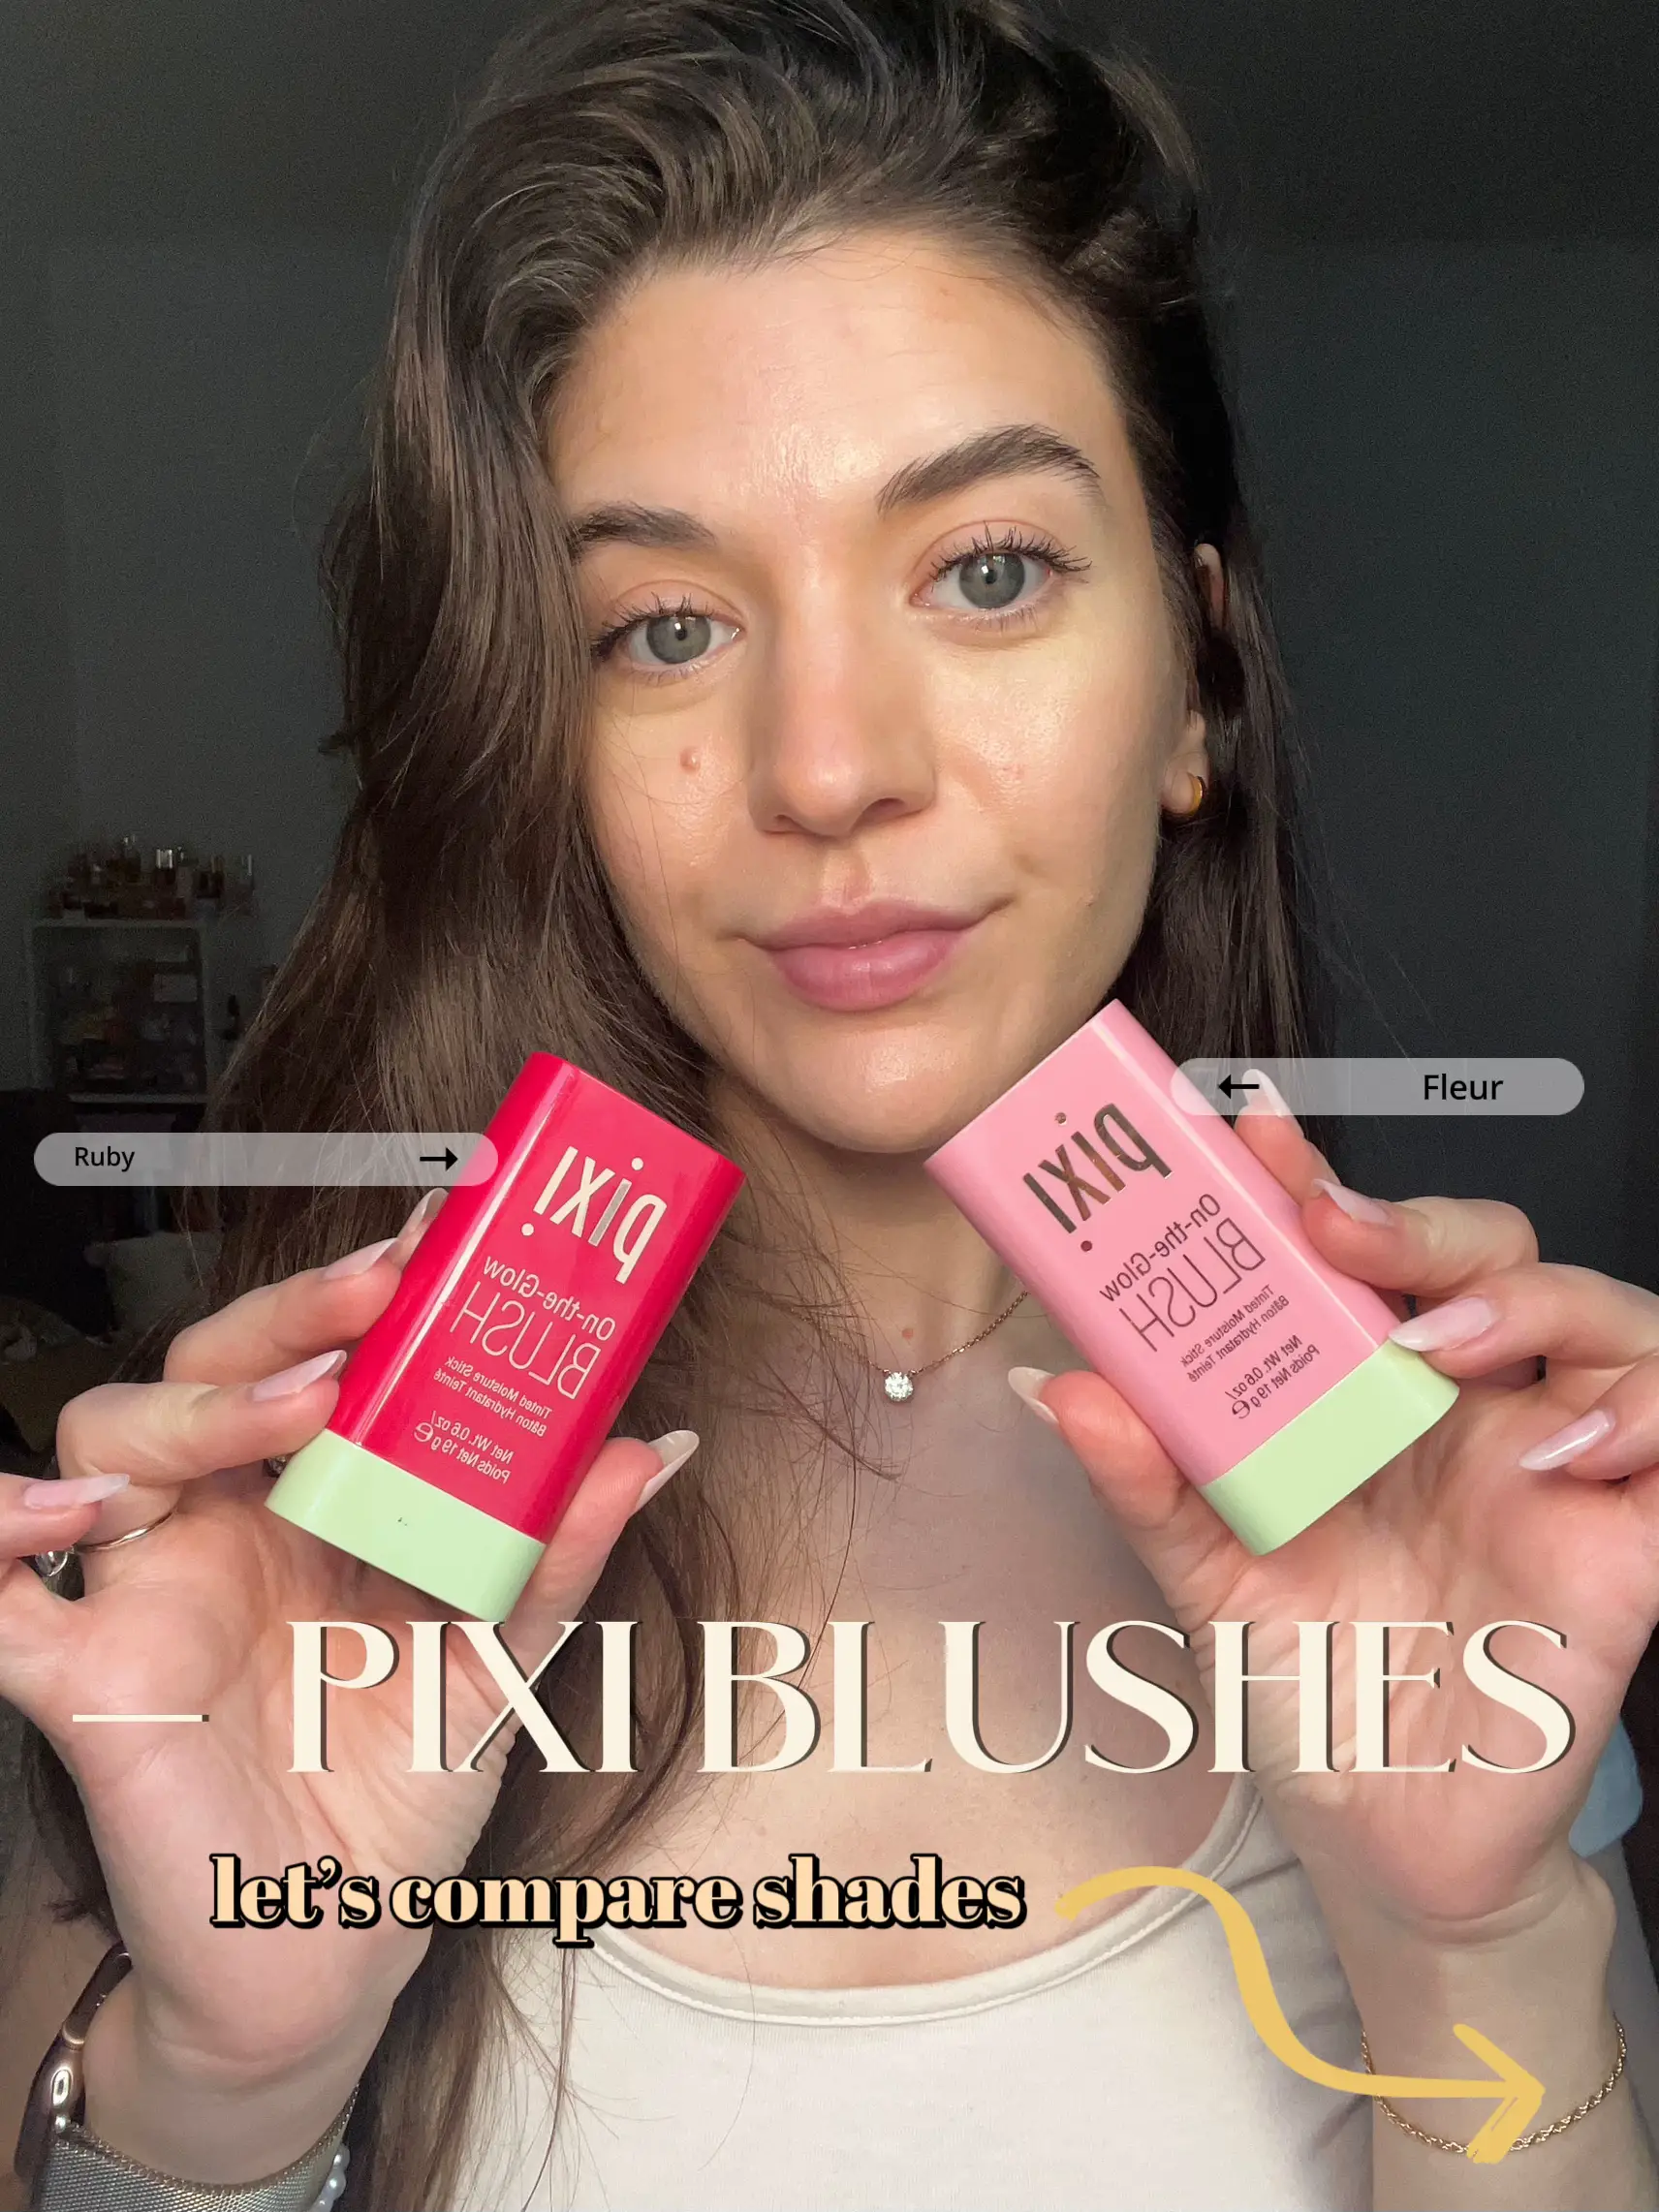 Comparing shades of Pixi Beauty blushes